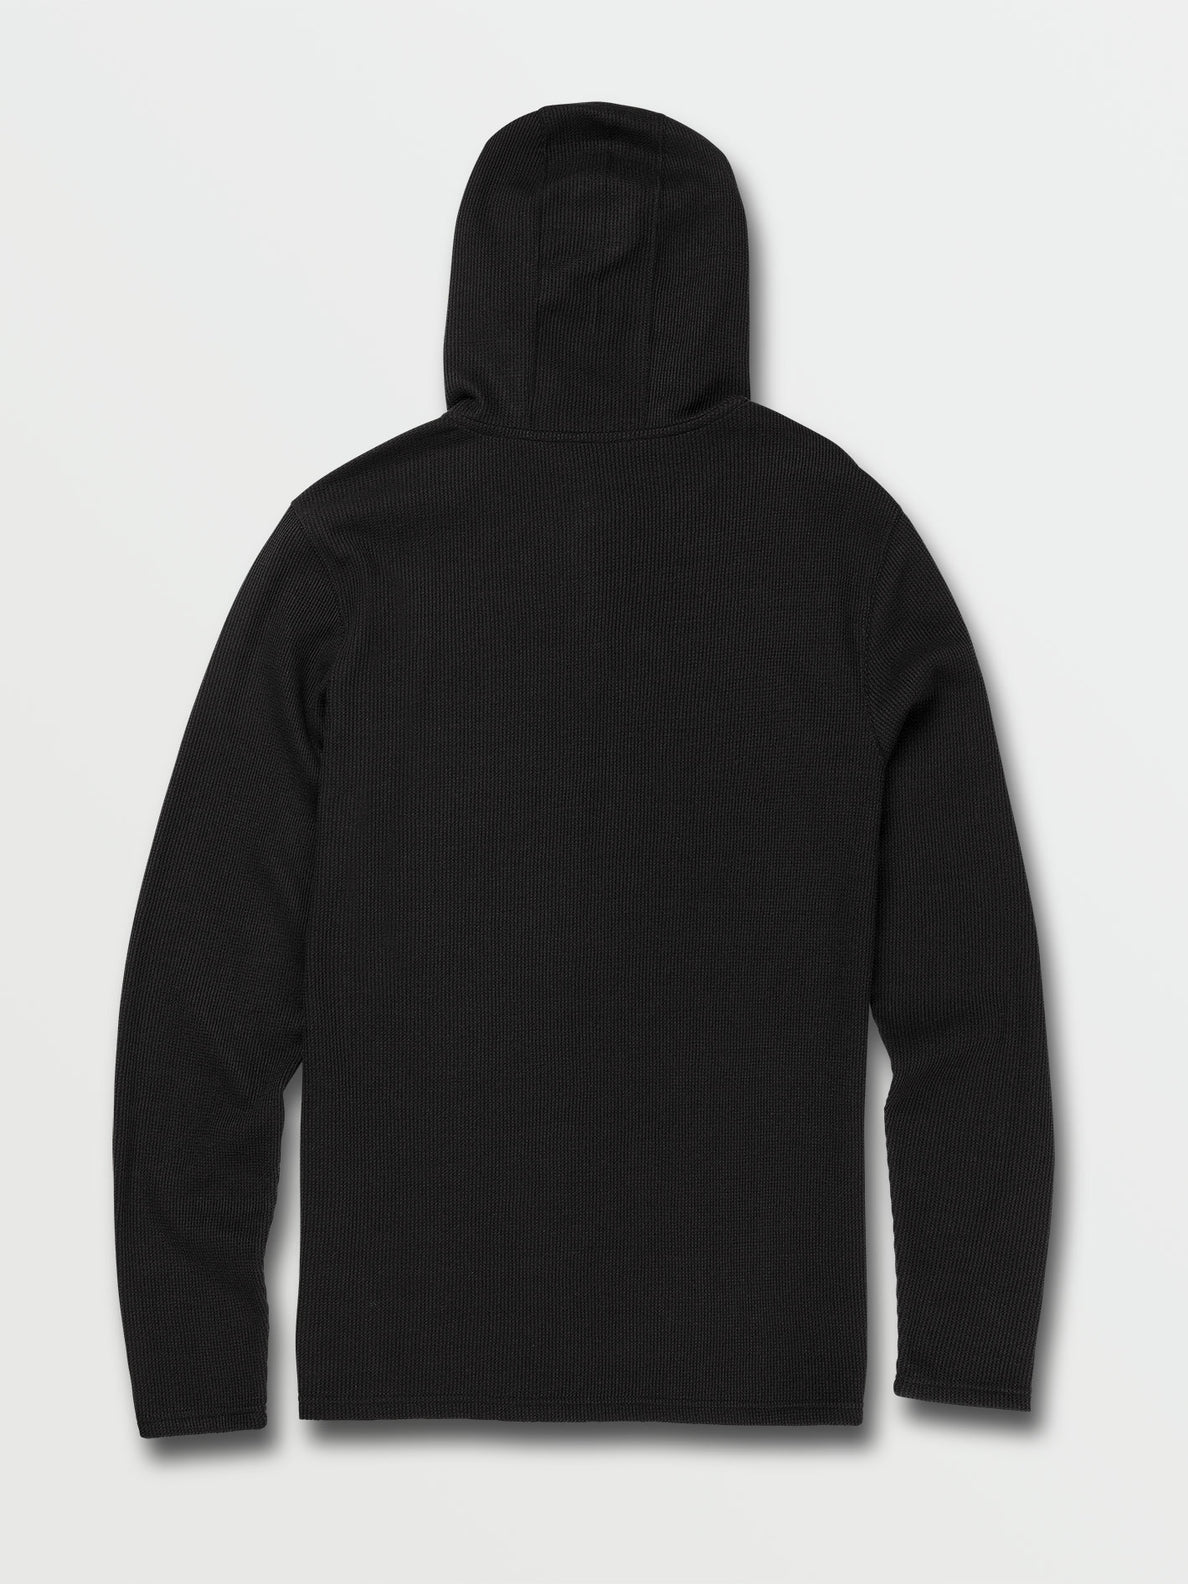 Russel Hooded Thermal - Black (A5302102_BLK) [B]